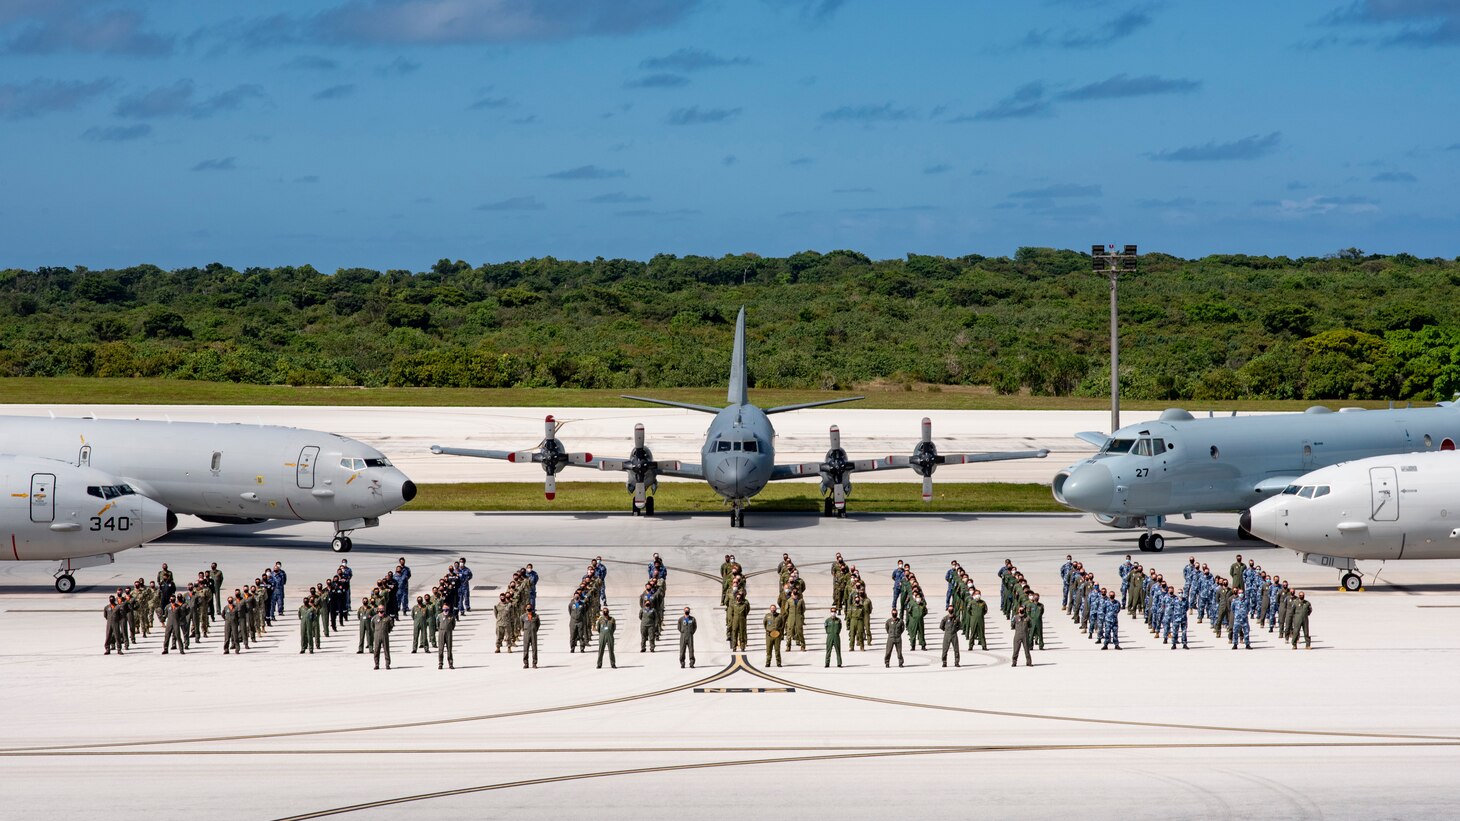 ANDERSEN AIR FORCE BASE, Guam (Jan. 28, 2021) Members of the Royal Australian Air Force (RAAF), Japan Maritime Self Defense Force (JMSDF), Indian Navy (IN) and the Royal Canadian Air Force (RCAF), along with Patrol Squadron (VP) 5's "Mad Foxes" and VP 8's "Fighting Tigers", pose for a photo at the conclusion of Exercise Sea Dragon. Sea Dragon is an annual multi-lateral anti-submarine warfare exercise that improves the interoperability elements required to effectively and cohesively respond to the defense of a regional contingency in the Indo-Pacific, while continuing to build and strengthen relationships held between nations . As the U.S. Navy's largest forward-deployed fleet, 7th Fleet employs 50 to 70 ships and submarines across the Western Pacific and Indian Oceans. U.S. 7th Fleet routinely operates and interacts with 35 maritime nations while conducting missions to preserve and protect a free and open Indo-Pacific region. (U.S. Navy photo by Lt. Cmdr. Kyle Hooker)